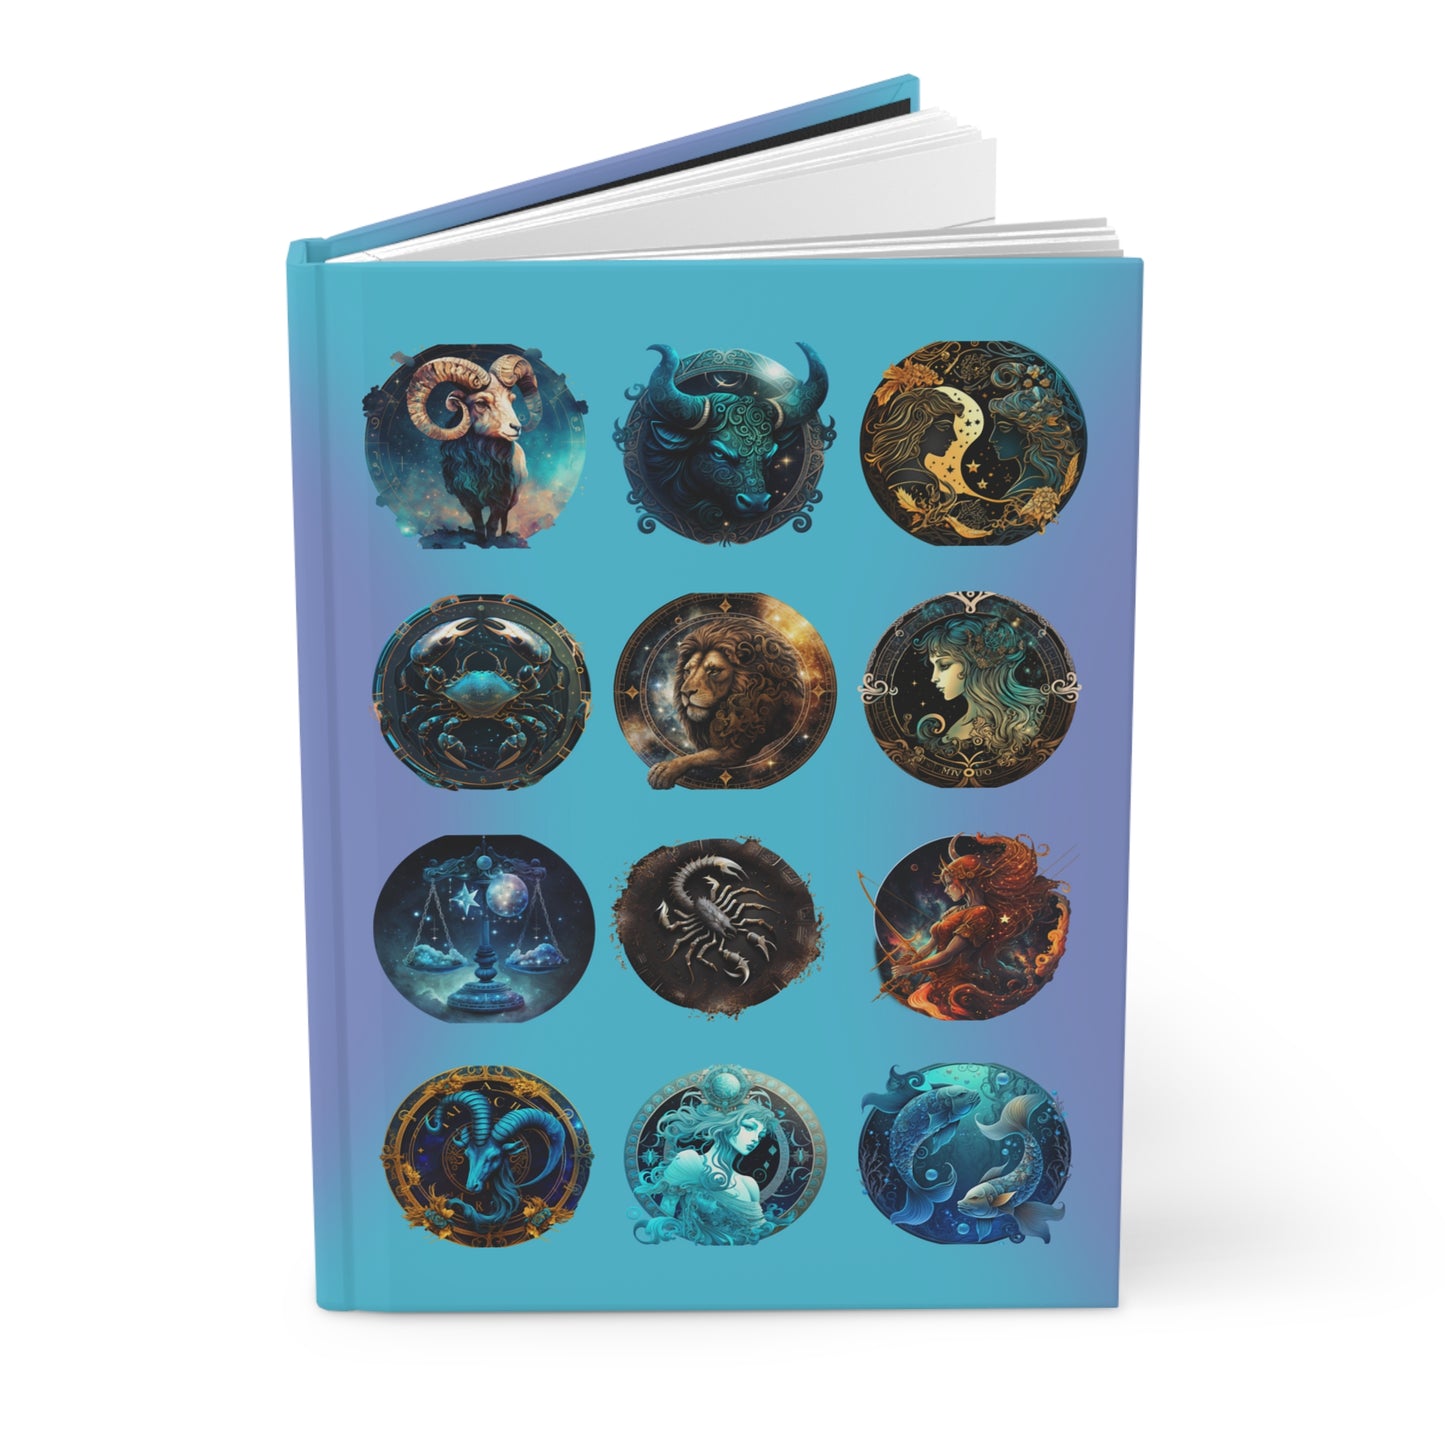 Zodiac Lined Journal in Blue - Hardcover 150 Page